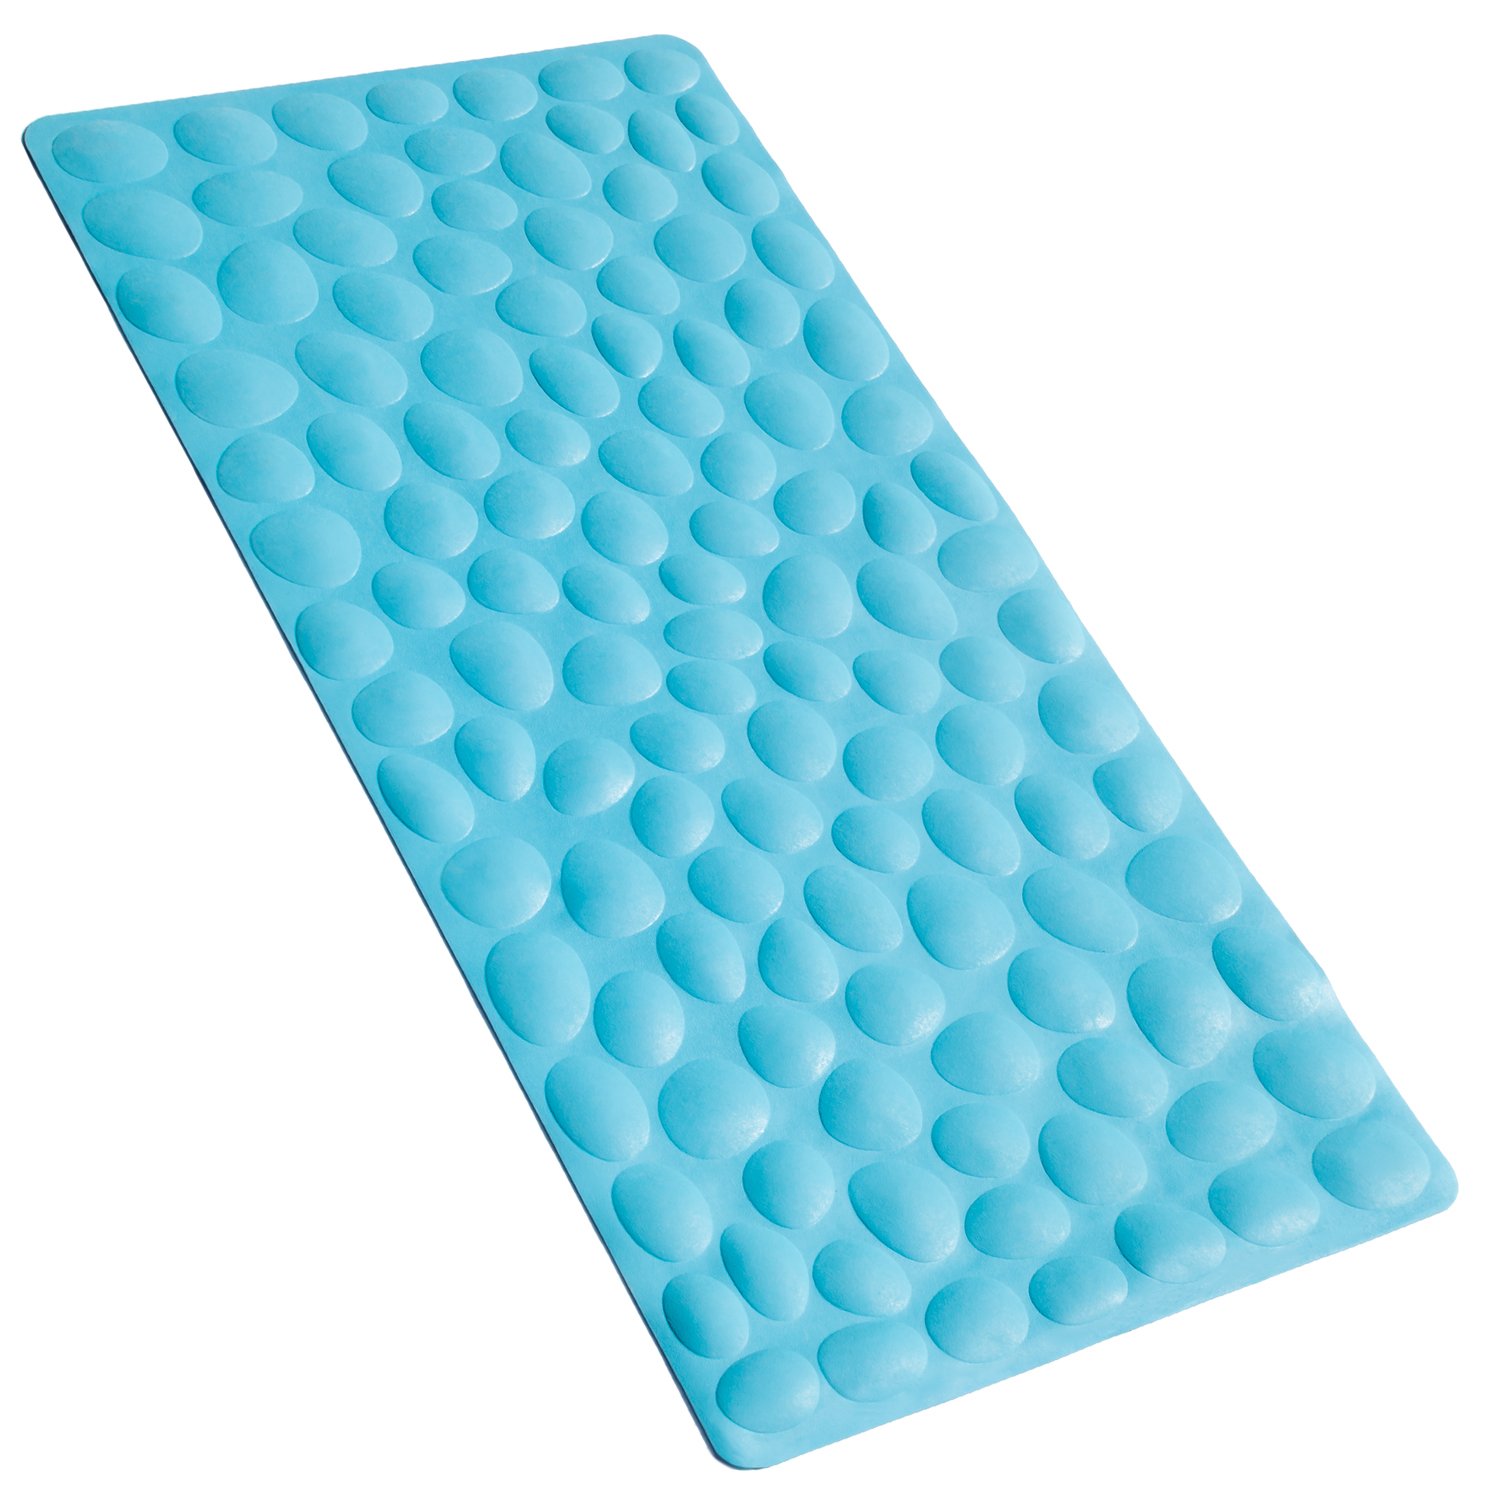 OTHWAY Non-Slip Bathtub Mat Soft Rubber Bathroom Bathmat with Strong Suction Cups